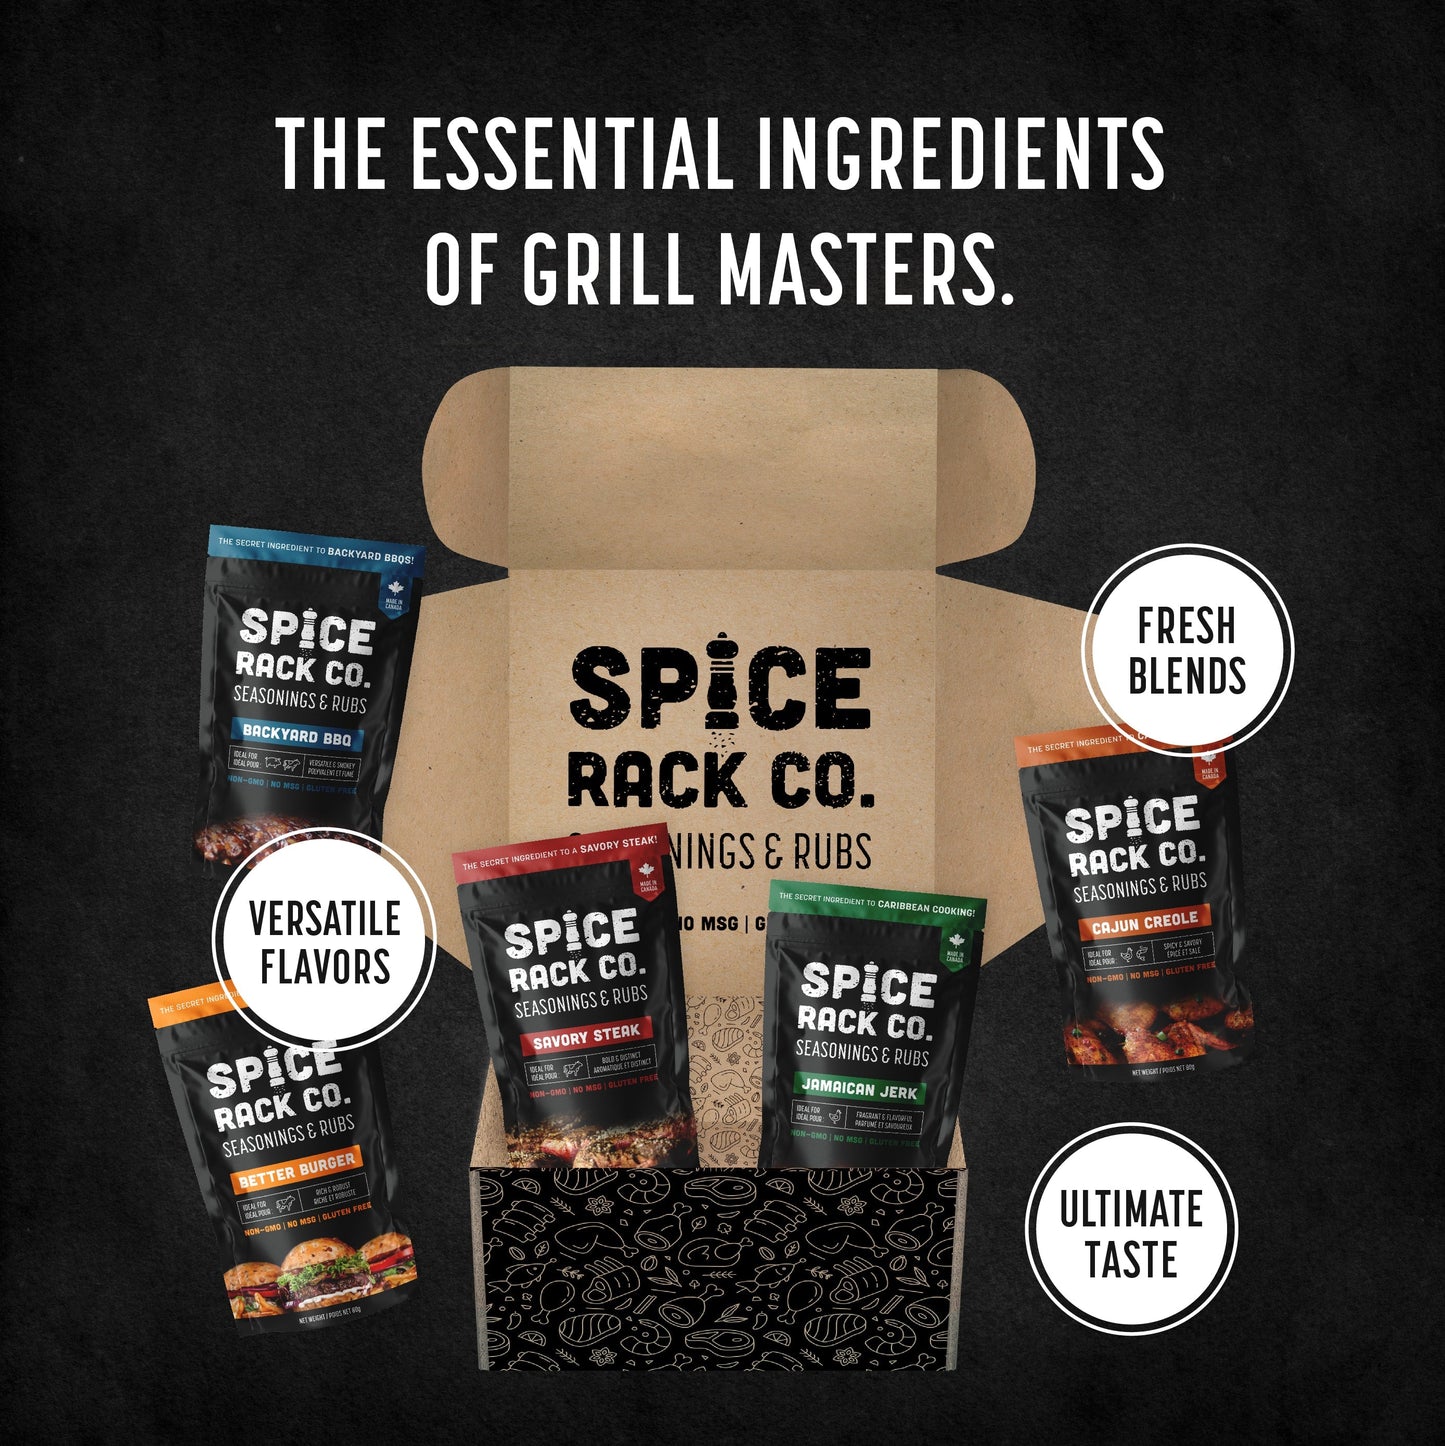 Spice Rack Co's Essentials Pack gift box overlaid with text: the essential ingredients of grill masters.